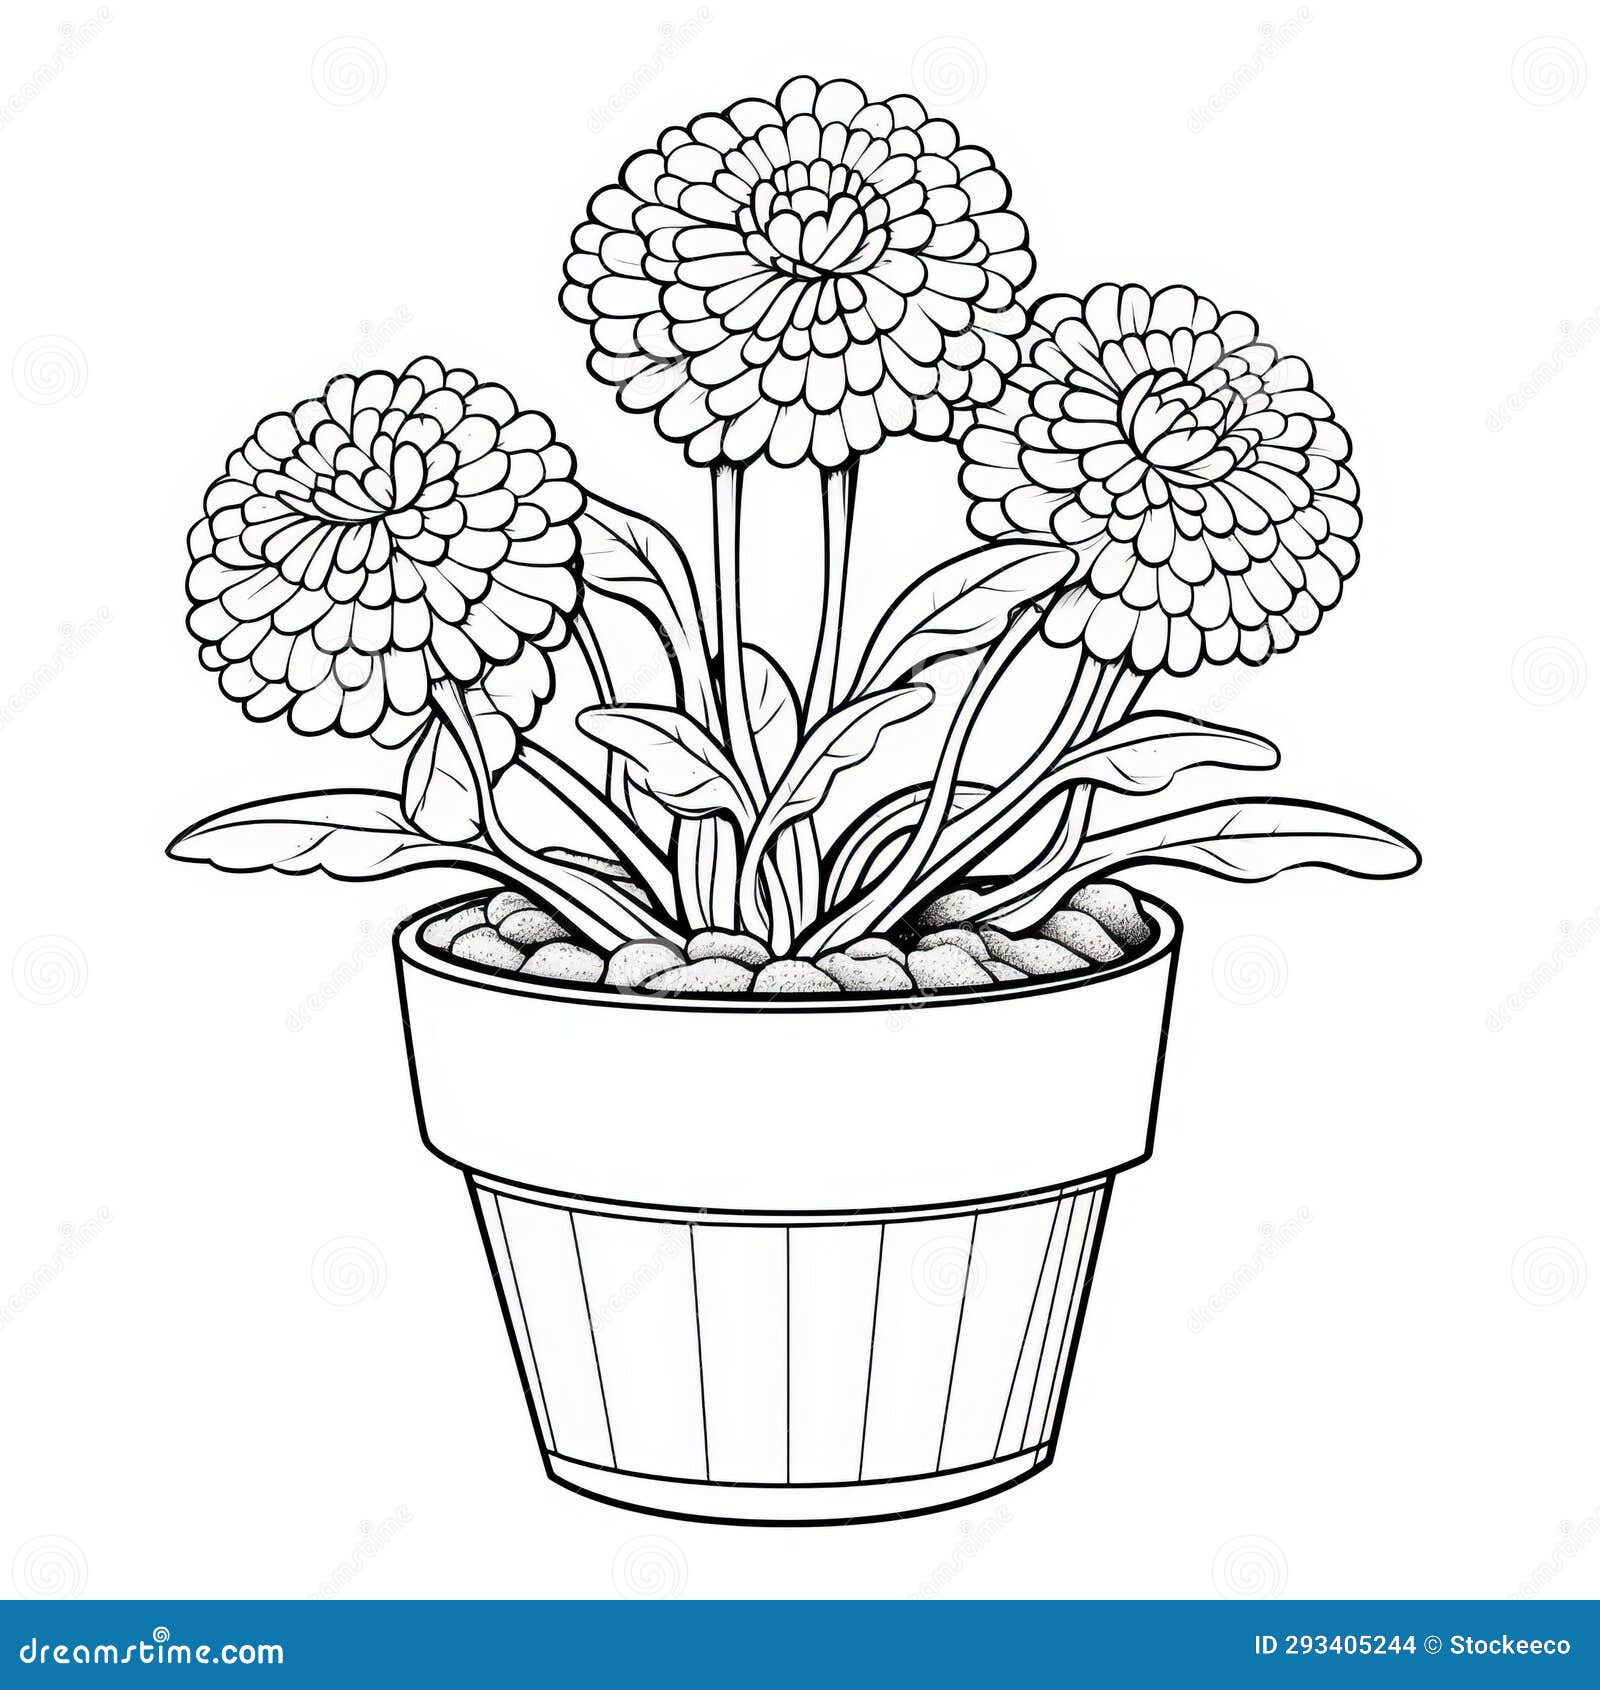 Captivating Flower Pots Coloring Page in Cottagepunk Style Stock ...